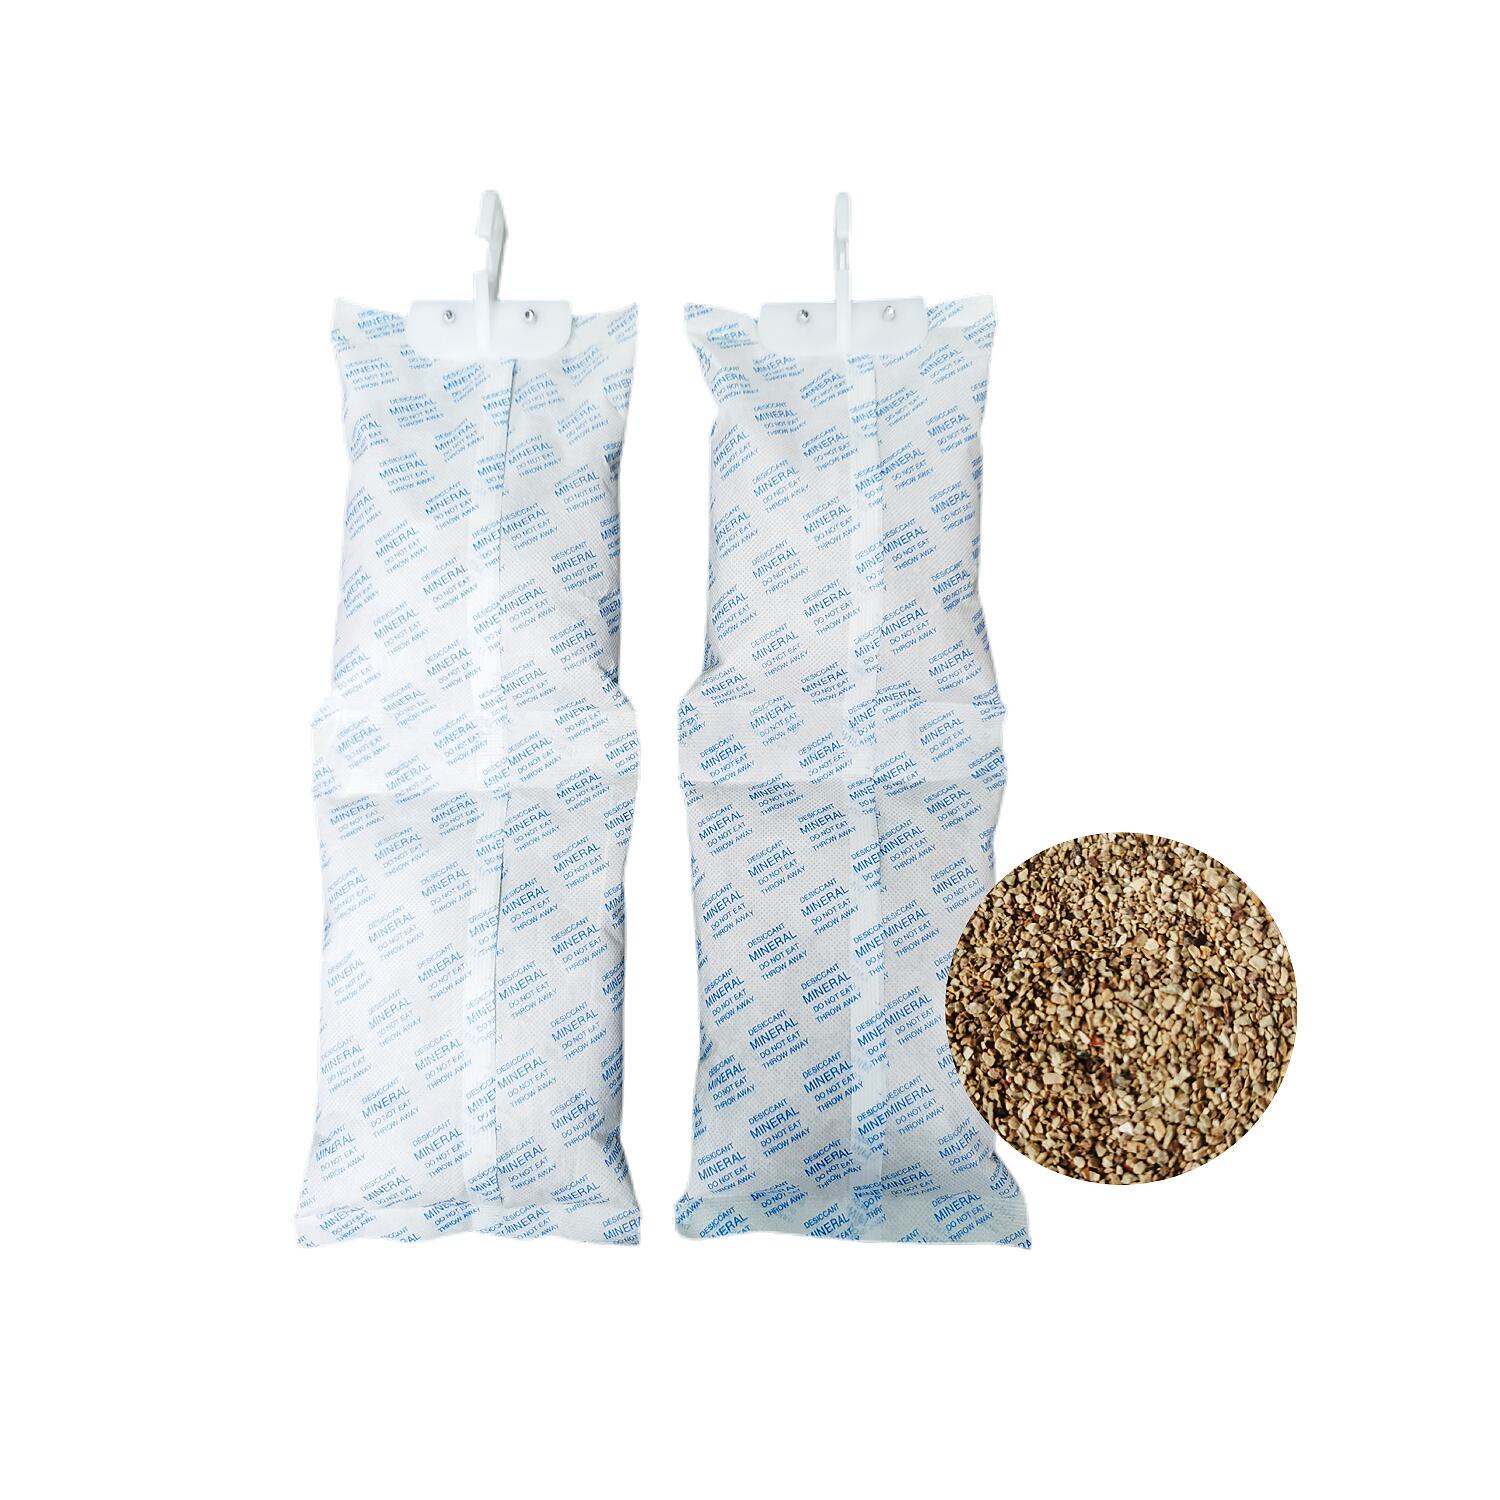 500g(2*250g) Montmorillonite Clay Container Desiccant in Non-woven Bag